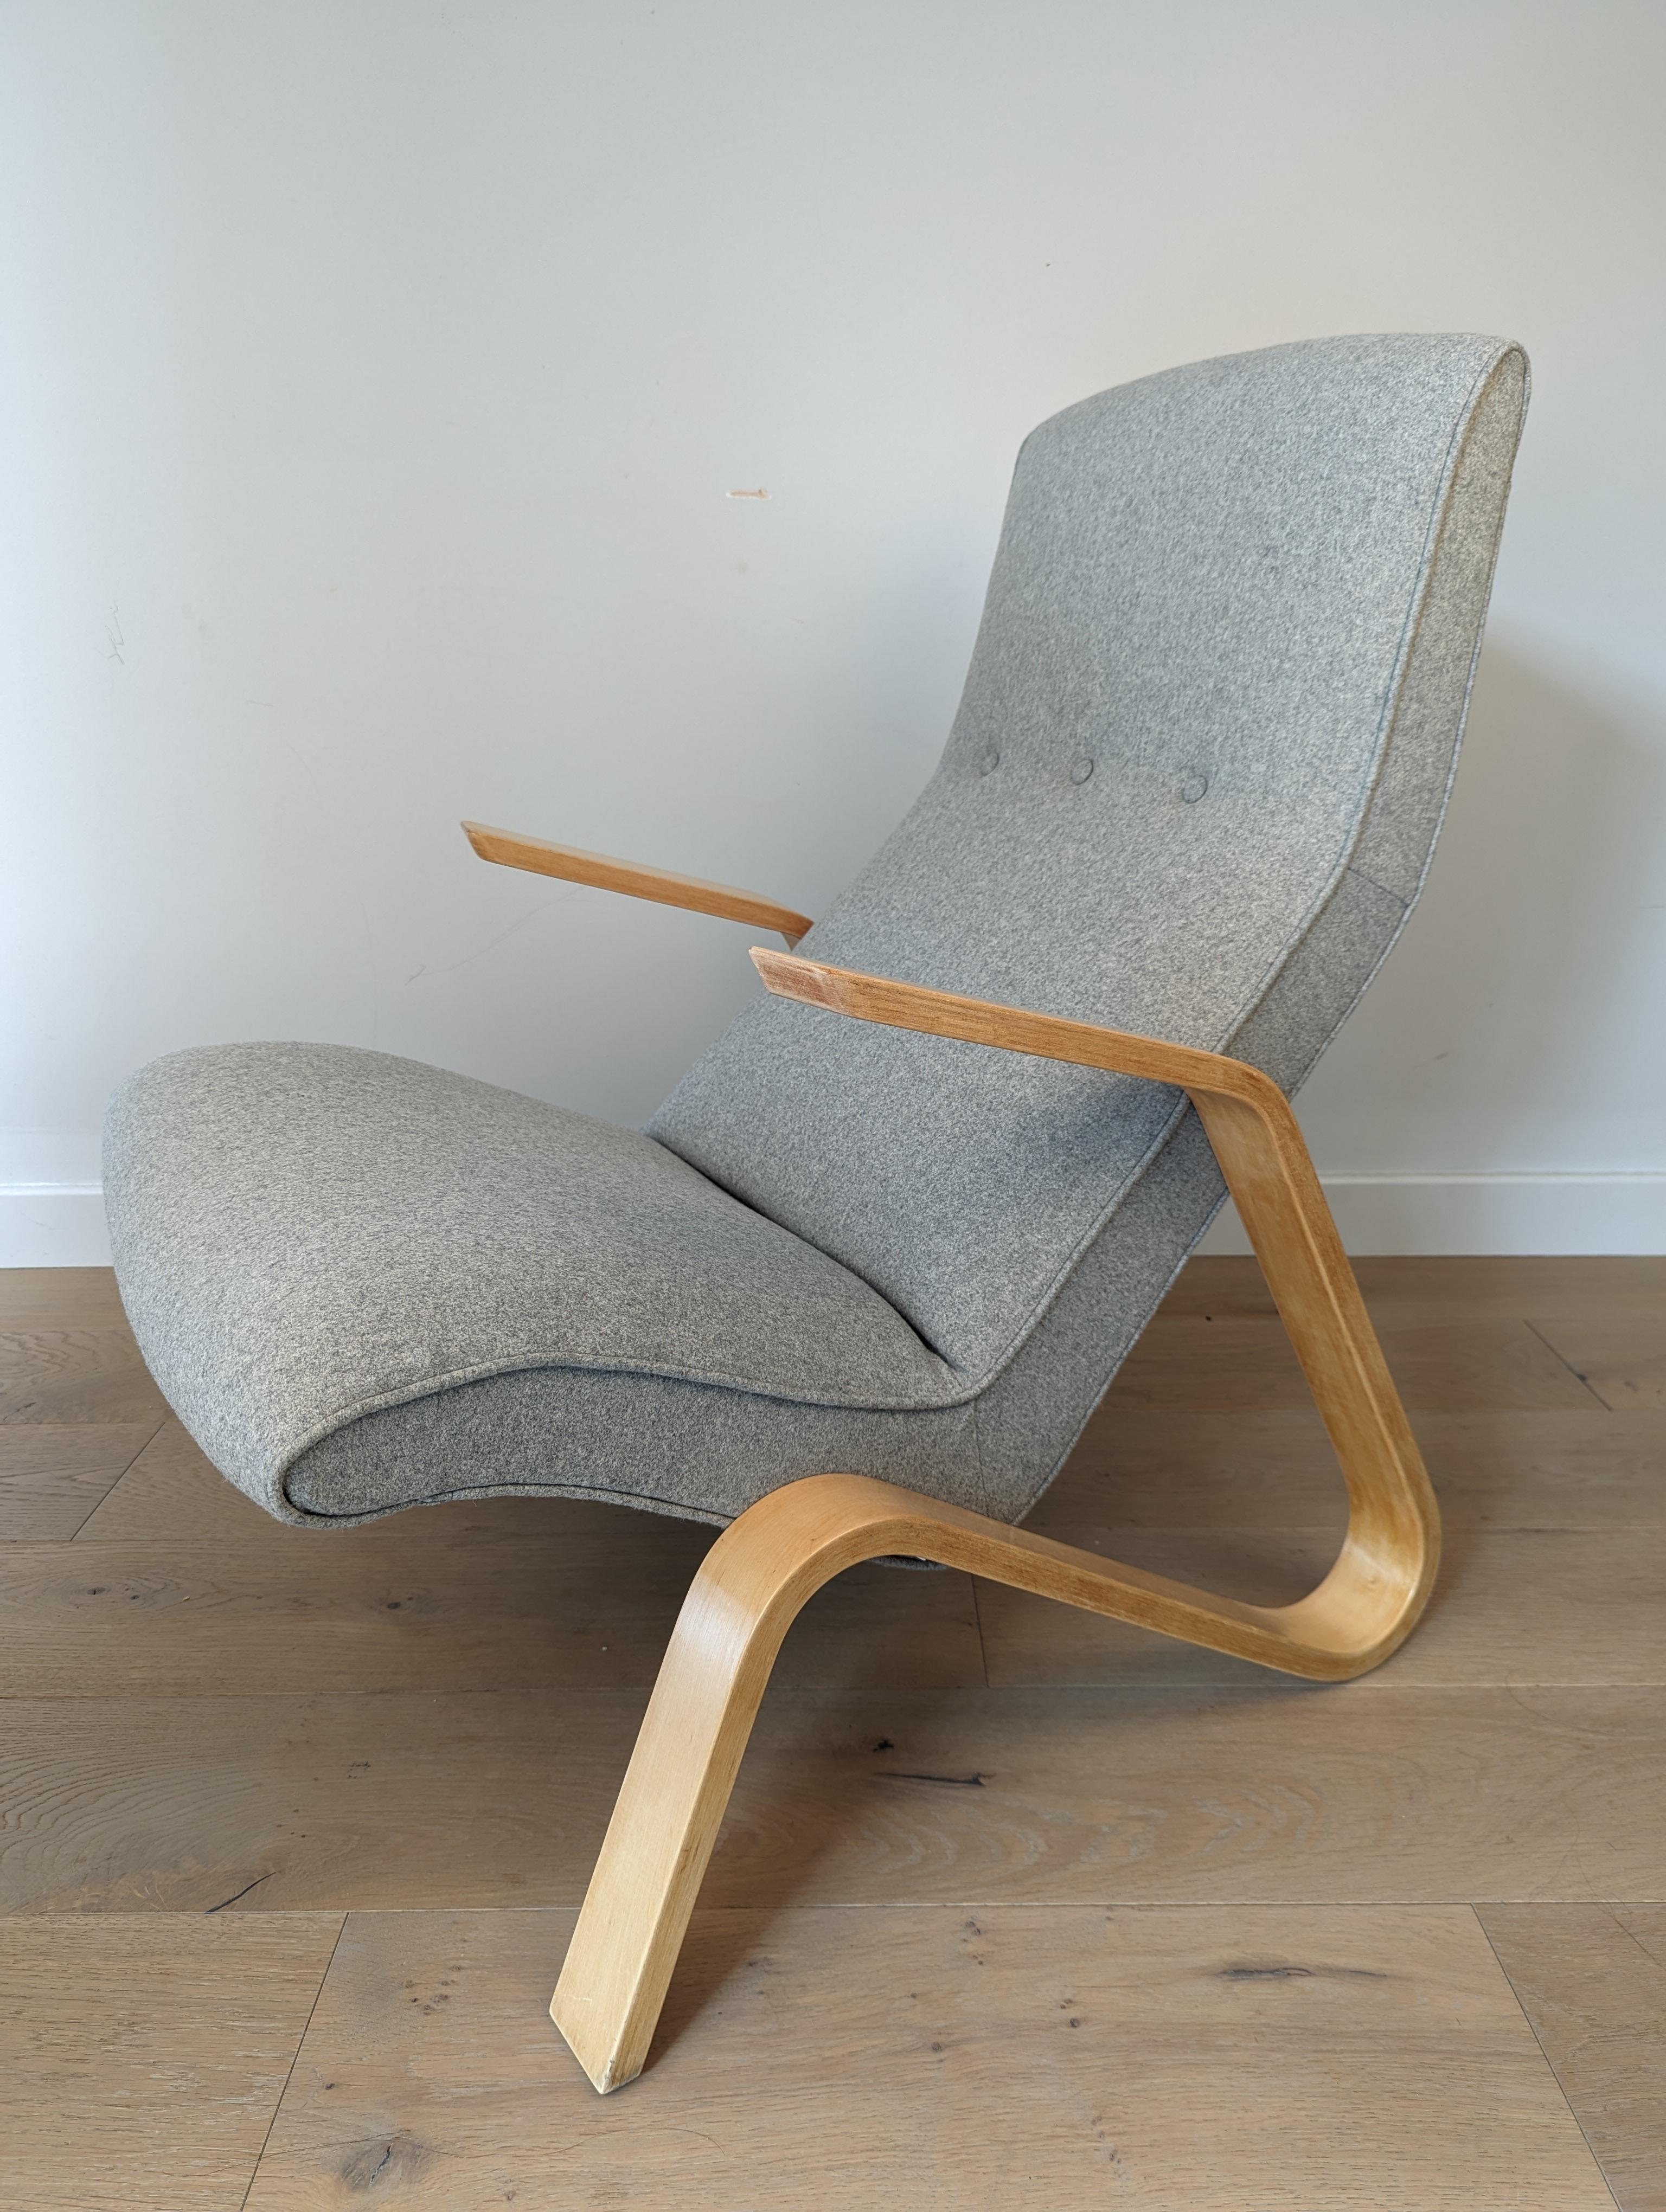 Wool Mid-century Grasshopper chair by Eero Saarinen for Knoll (1950s) For Sale